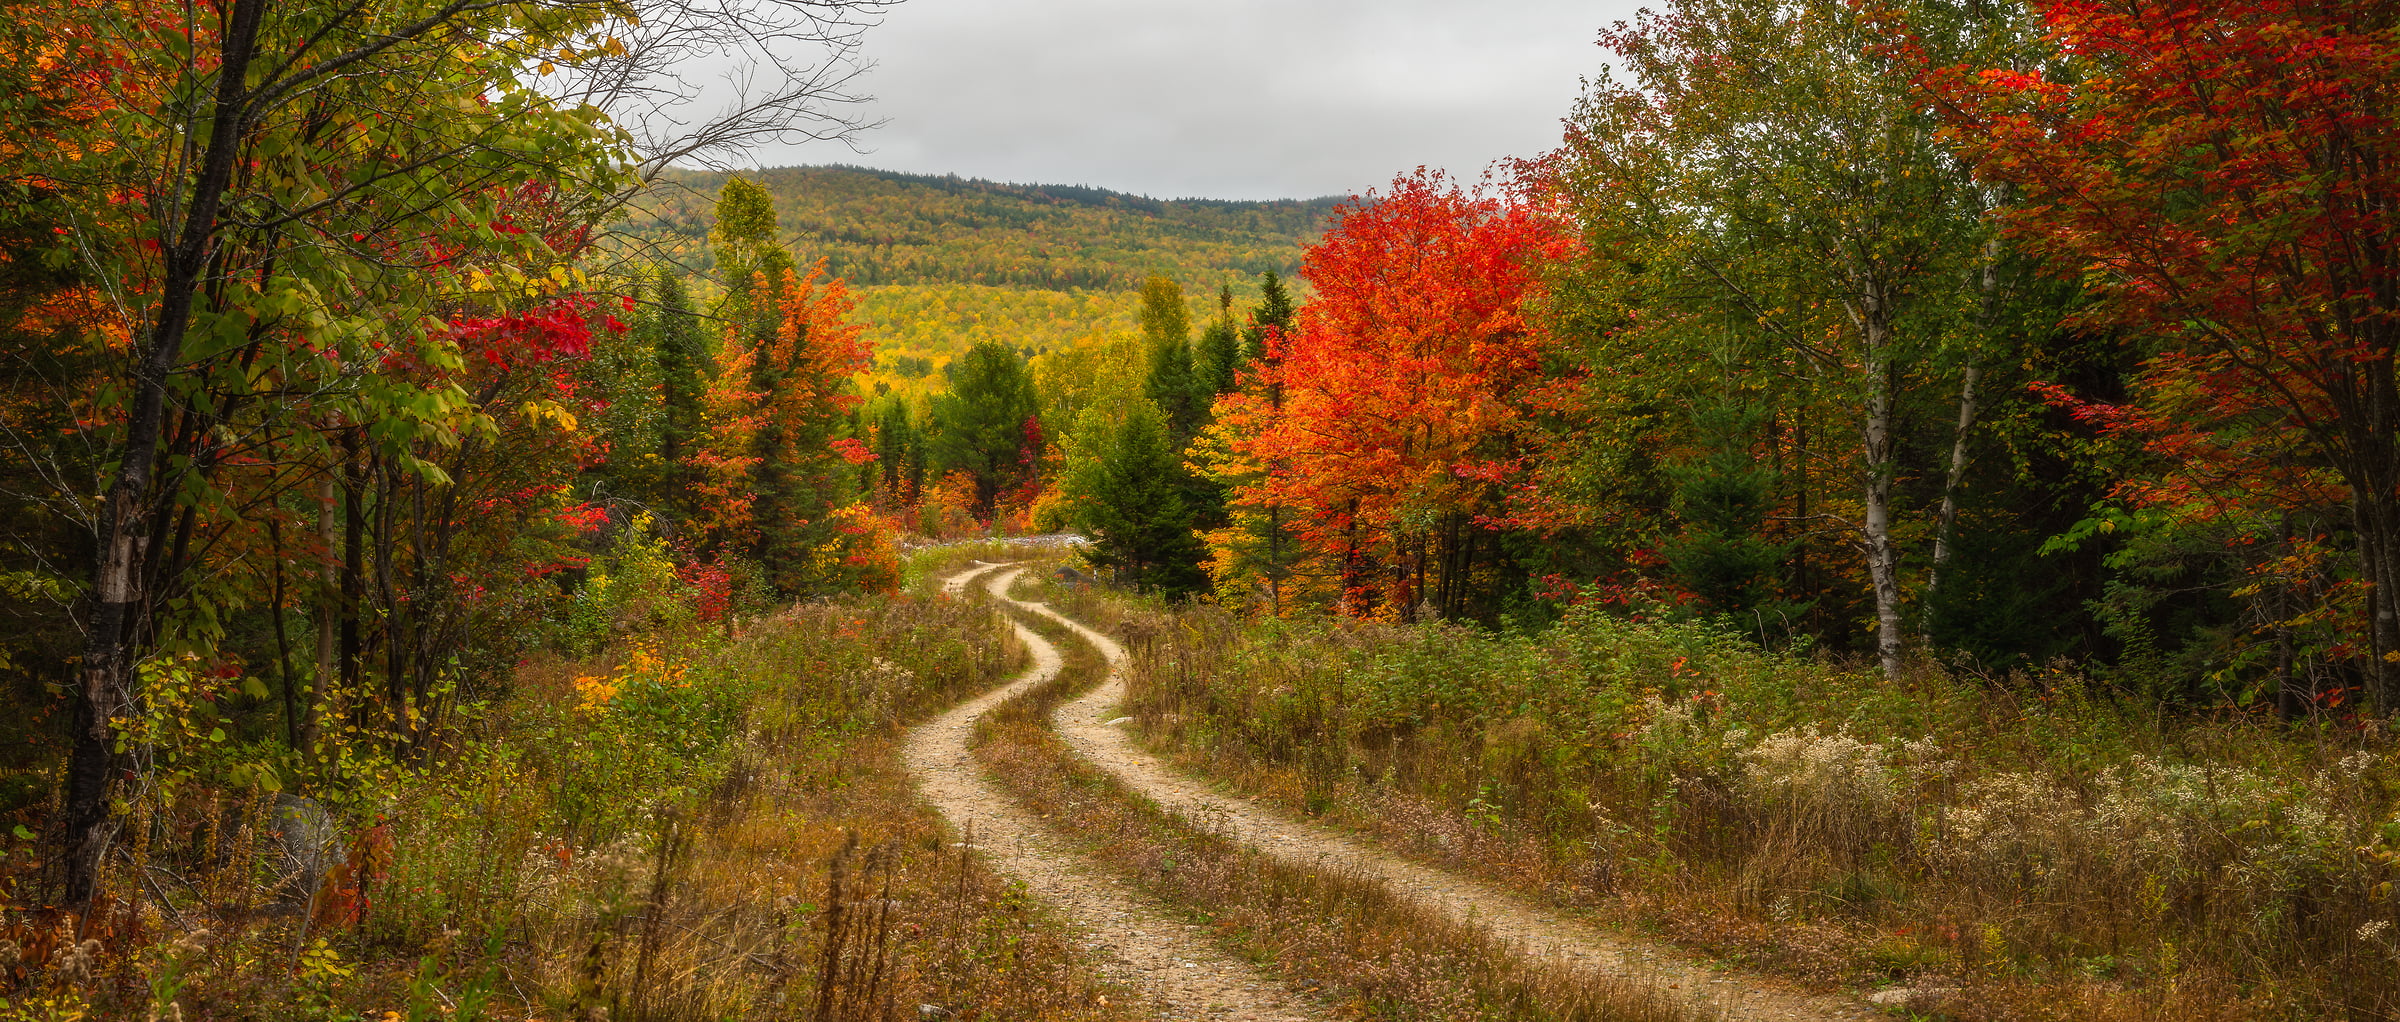 119 megapixels! A very high resolution, large-format photo of colorful fall foliage, leaves, and a winding dirt road; fine art photograph created by Aaron Priest in Northeast Piscataquis, Maine